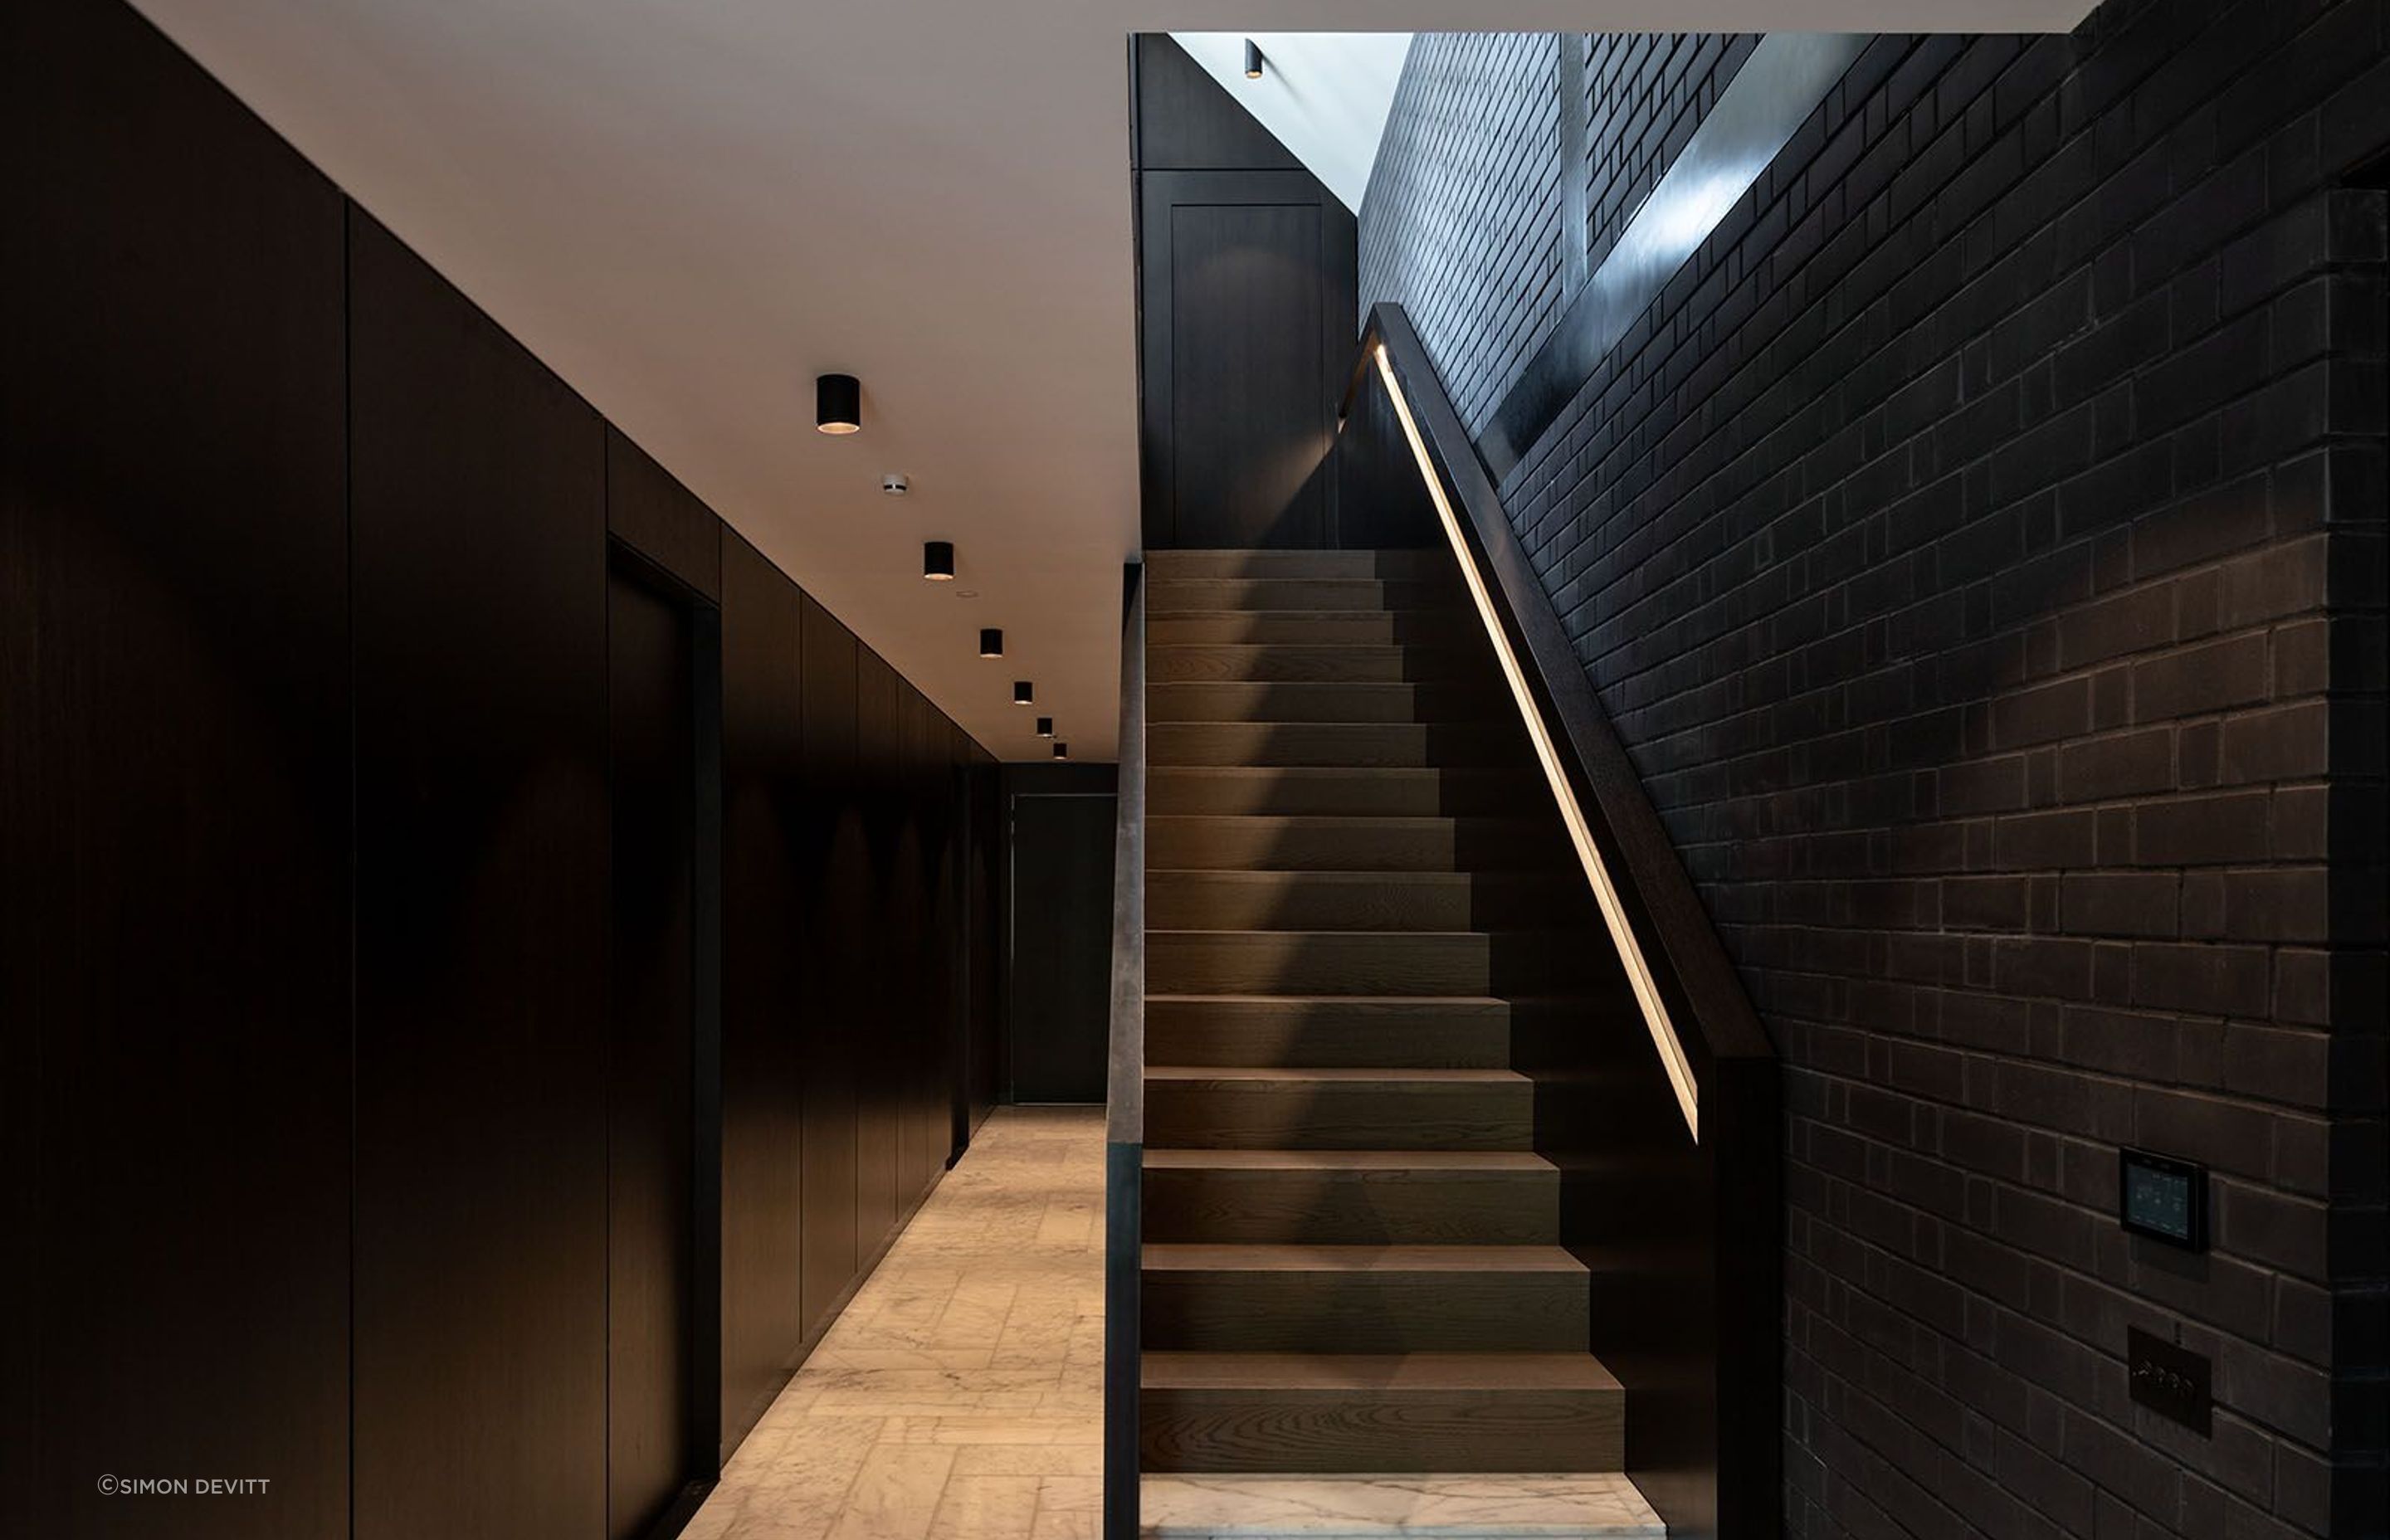 This corridor acts as the spine of the home - a spacious area that gives little away aside from an offering of texture and juxtaposition of colour.